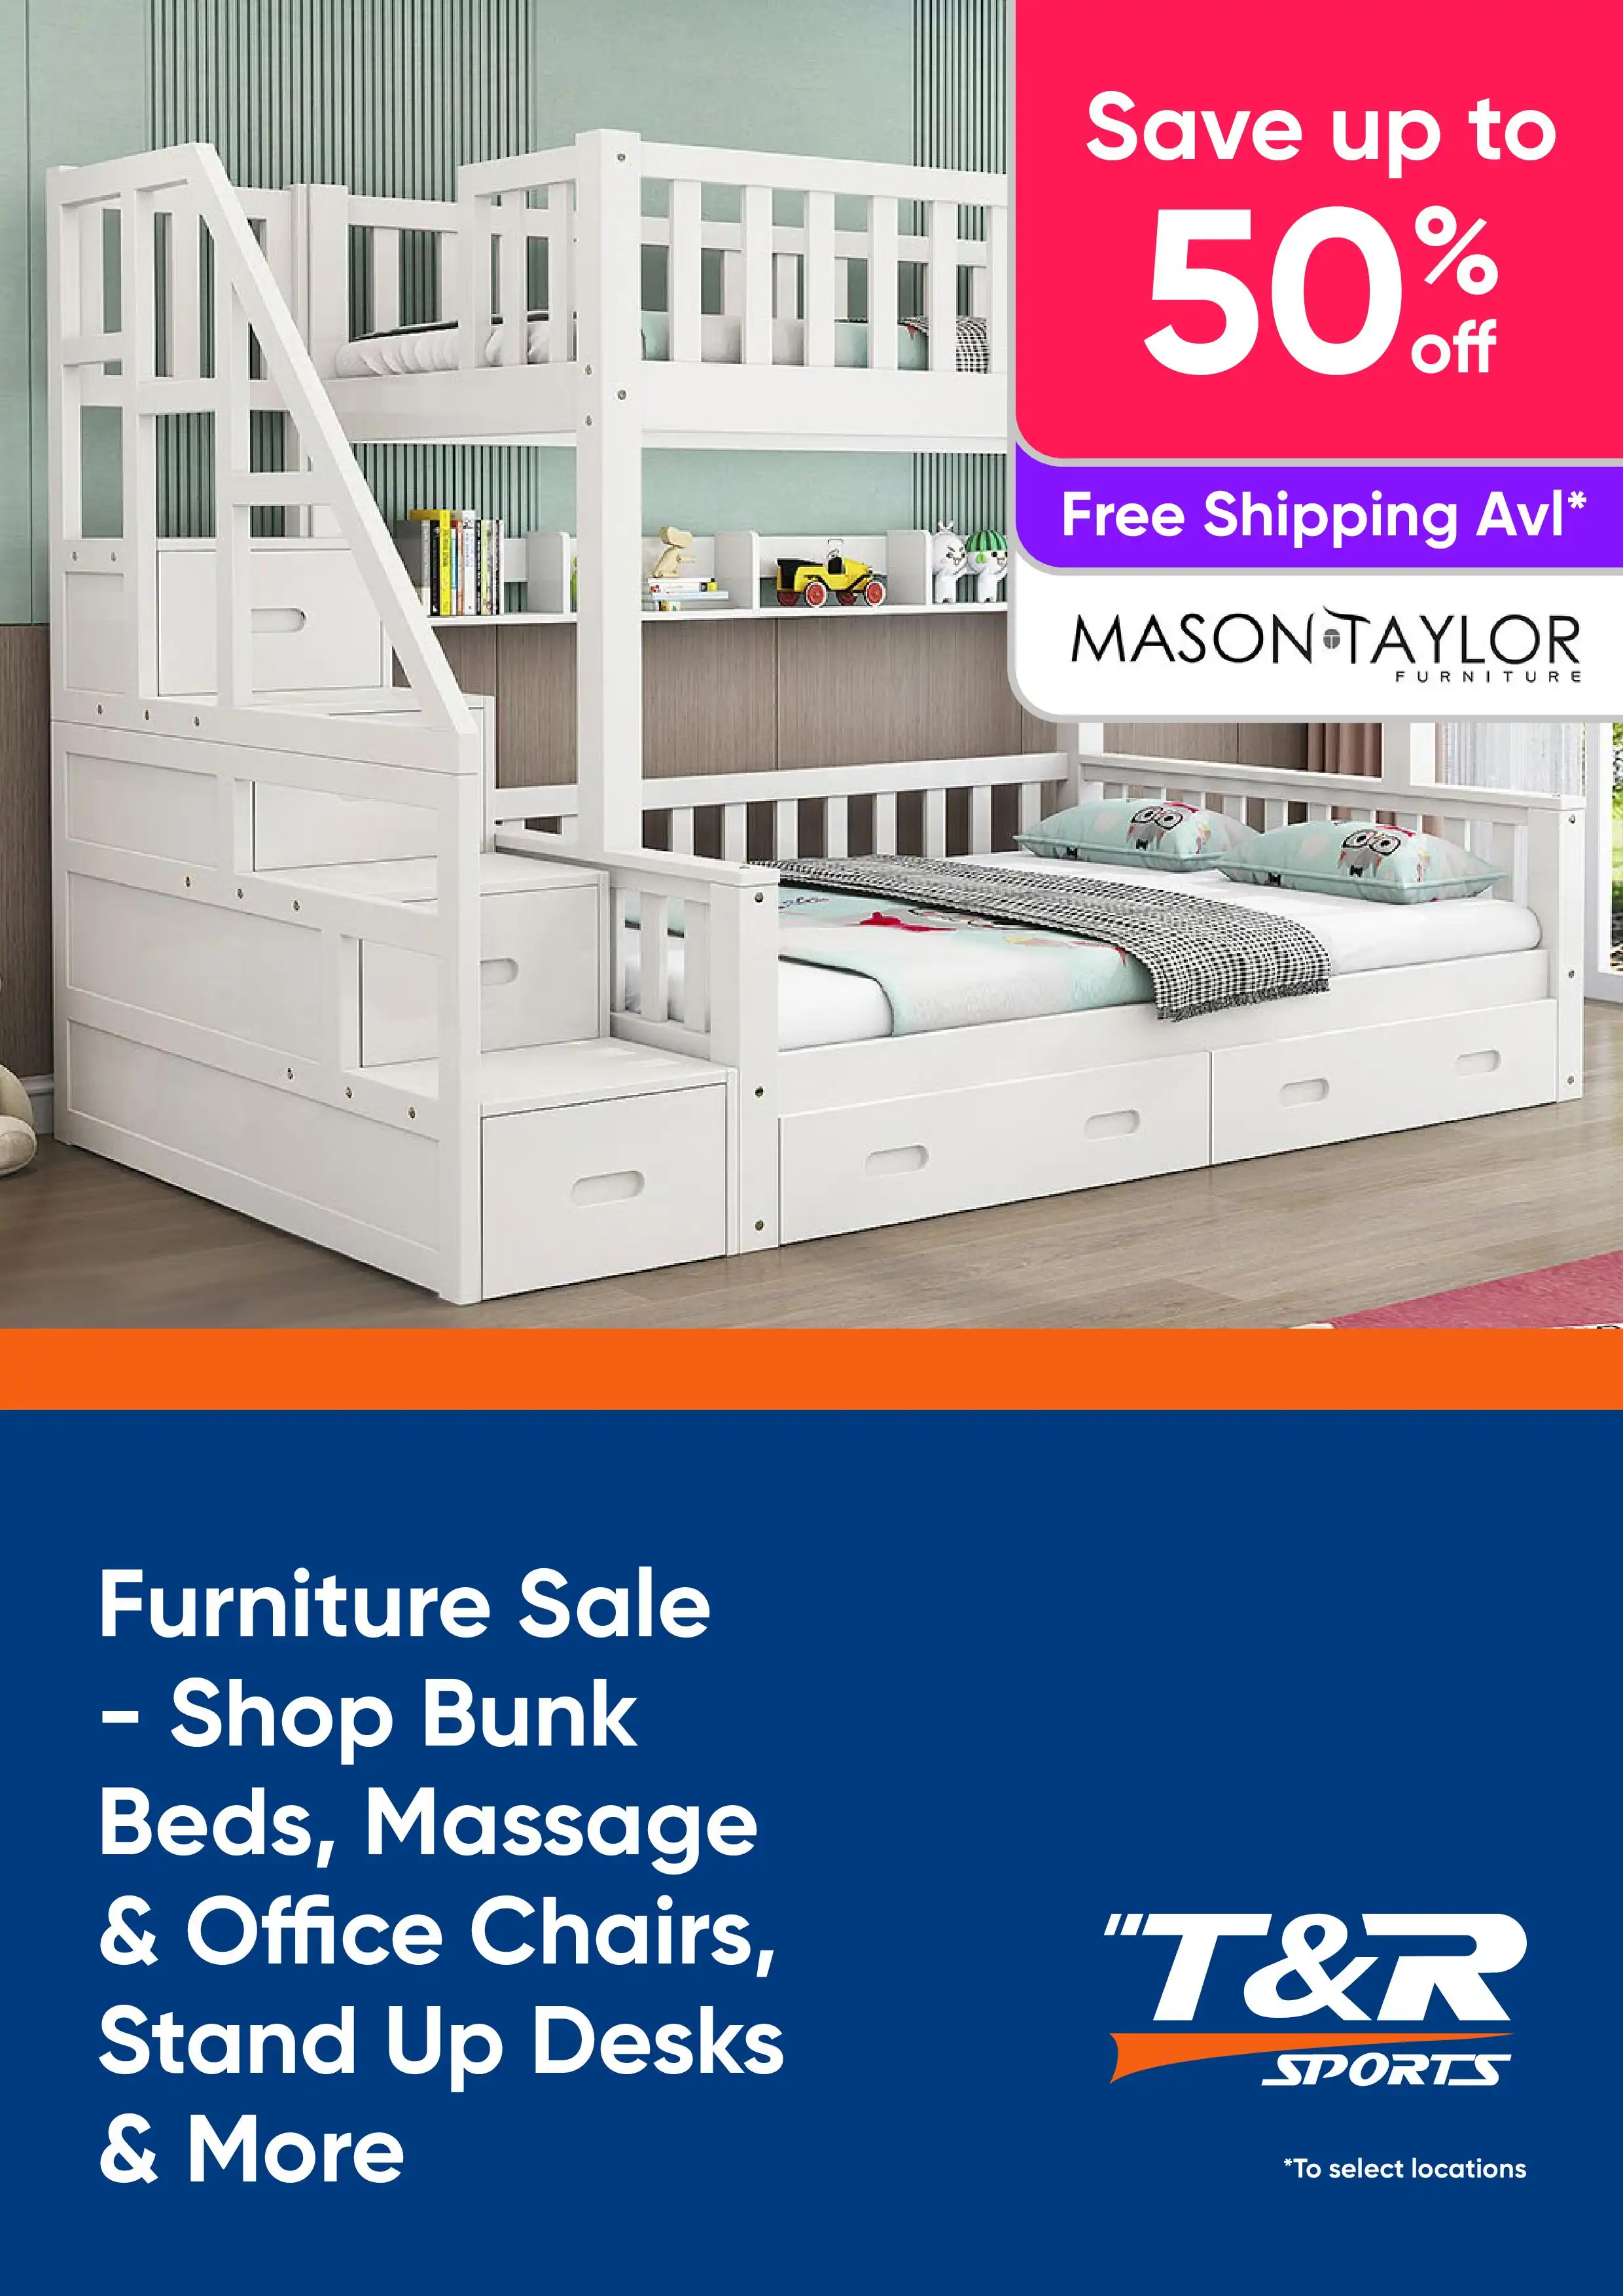 Furniture Sale Up to 50% Off RRP - Shop Bunk Beds, Office Chairs, Stand Up Desks and More